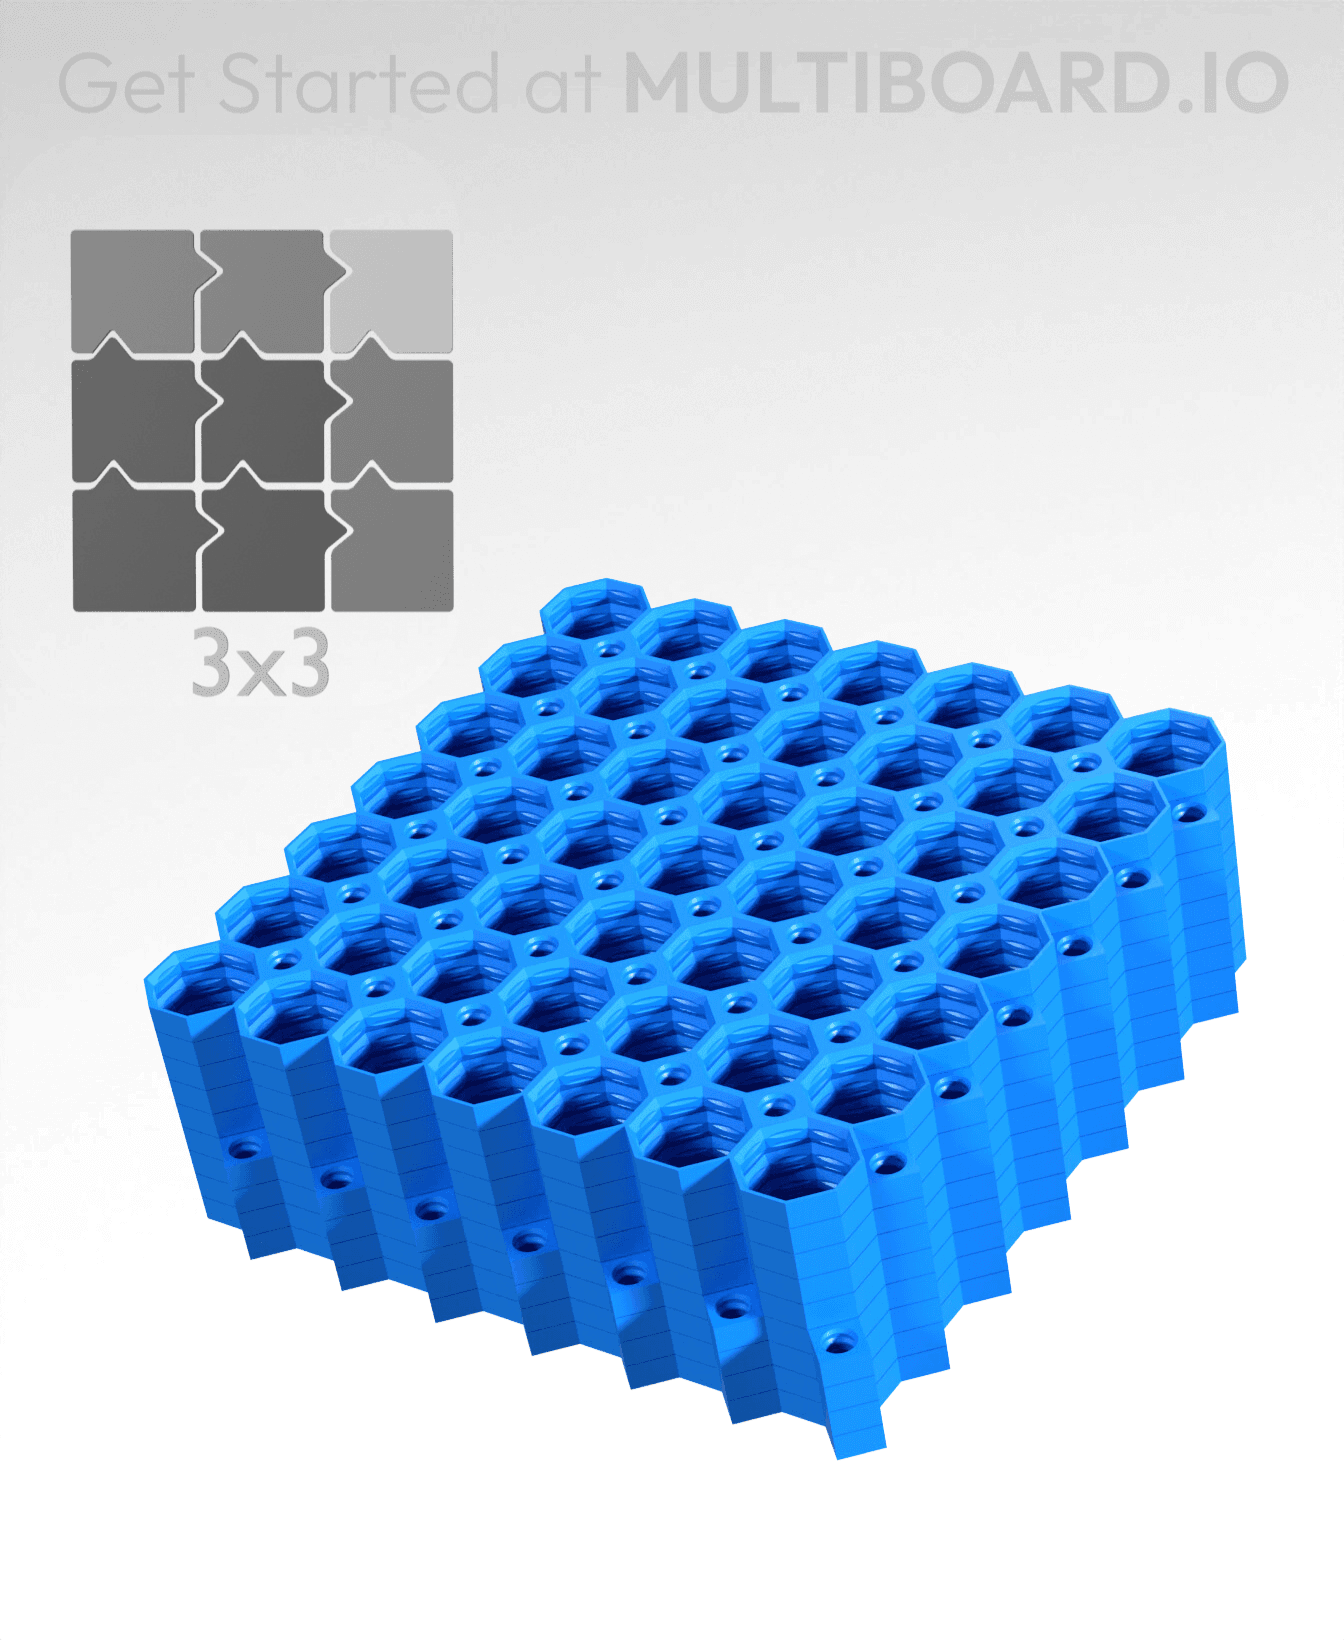 7x7 Tiles - 3x3 Board - Ironing Stack 3d model